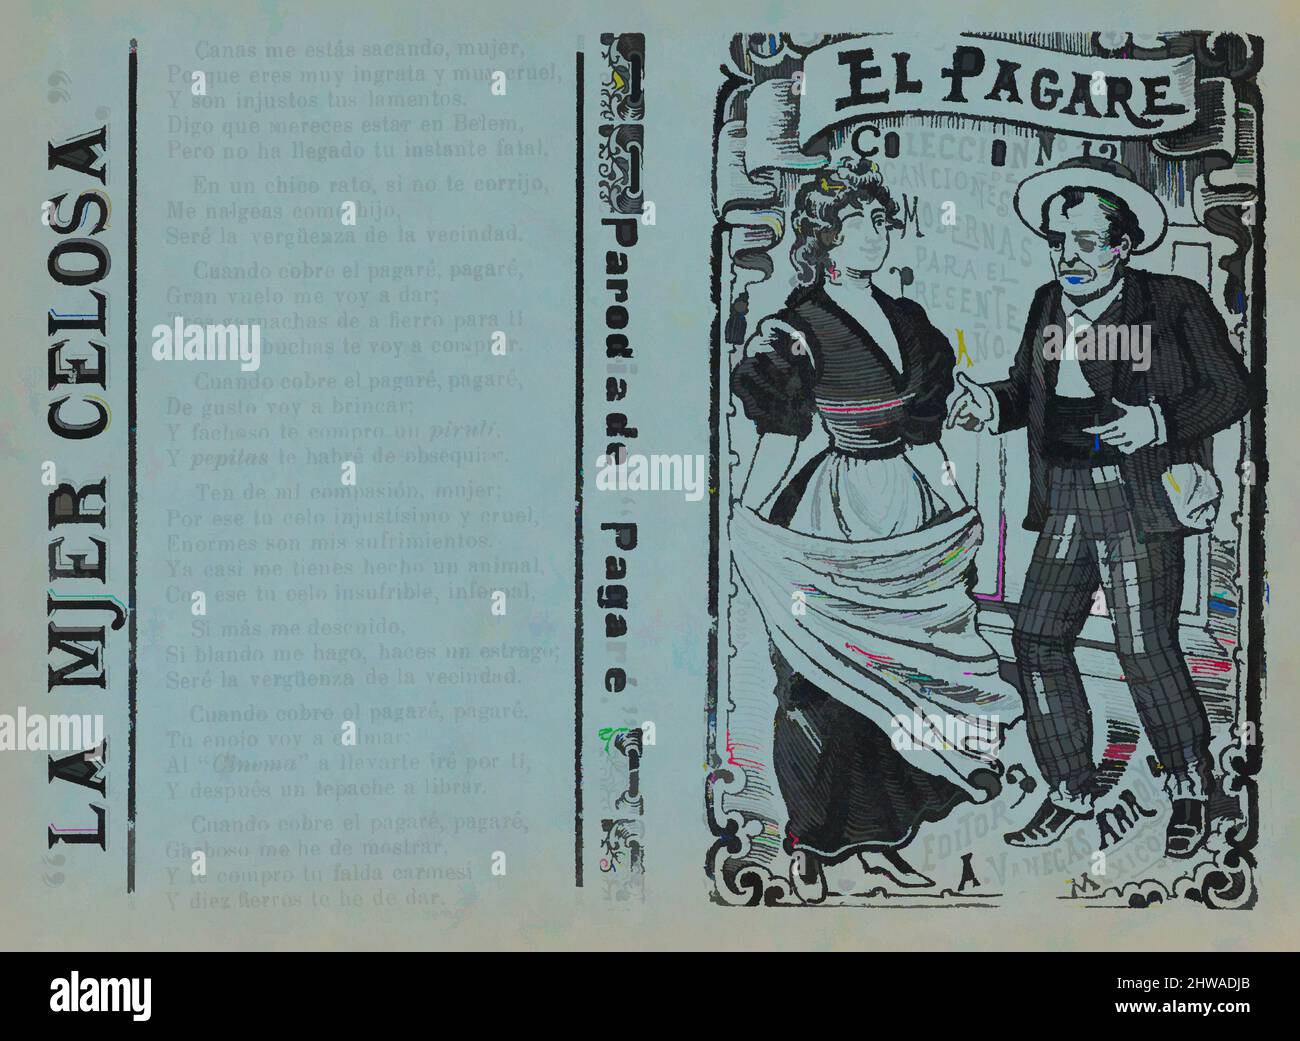 Art inspired by Cover for 'El Pagare', a man holding a cigarette and gesturing to a woman holding a shawl, José Guadalupe Posada Mexican, 1851, Classic works modernized by Artotop with a splash of modernity. Shapes, color and value, eye-catching visual impact on art. Emotions through freedom of artworks in a contemporary way. A timeless message pursuing a wildly creative new direction. Artists turning to the digital medium and creating the Artotop NFT Stock Photo